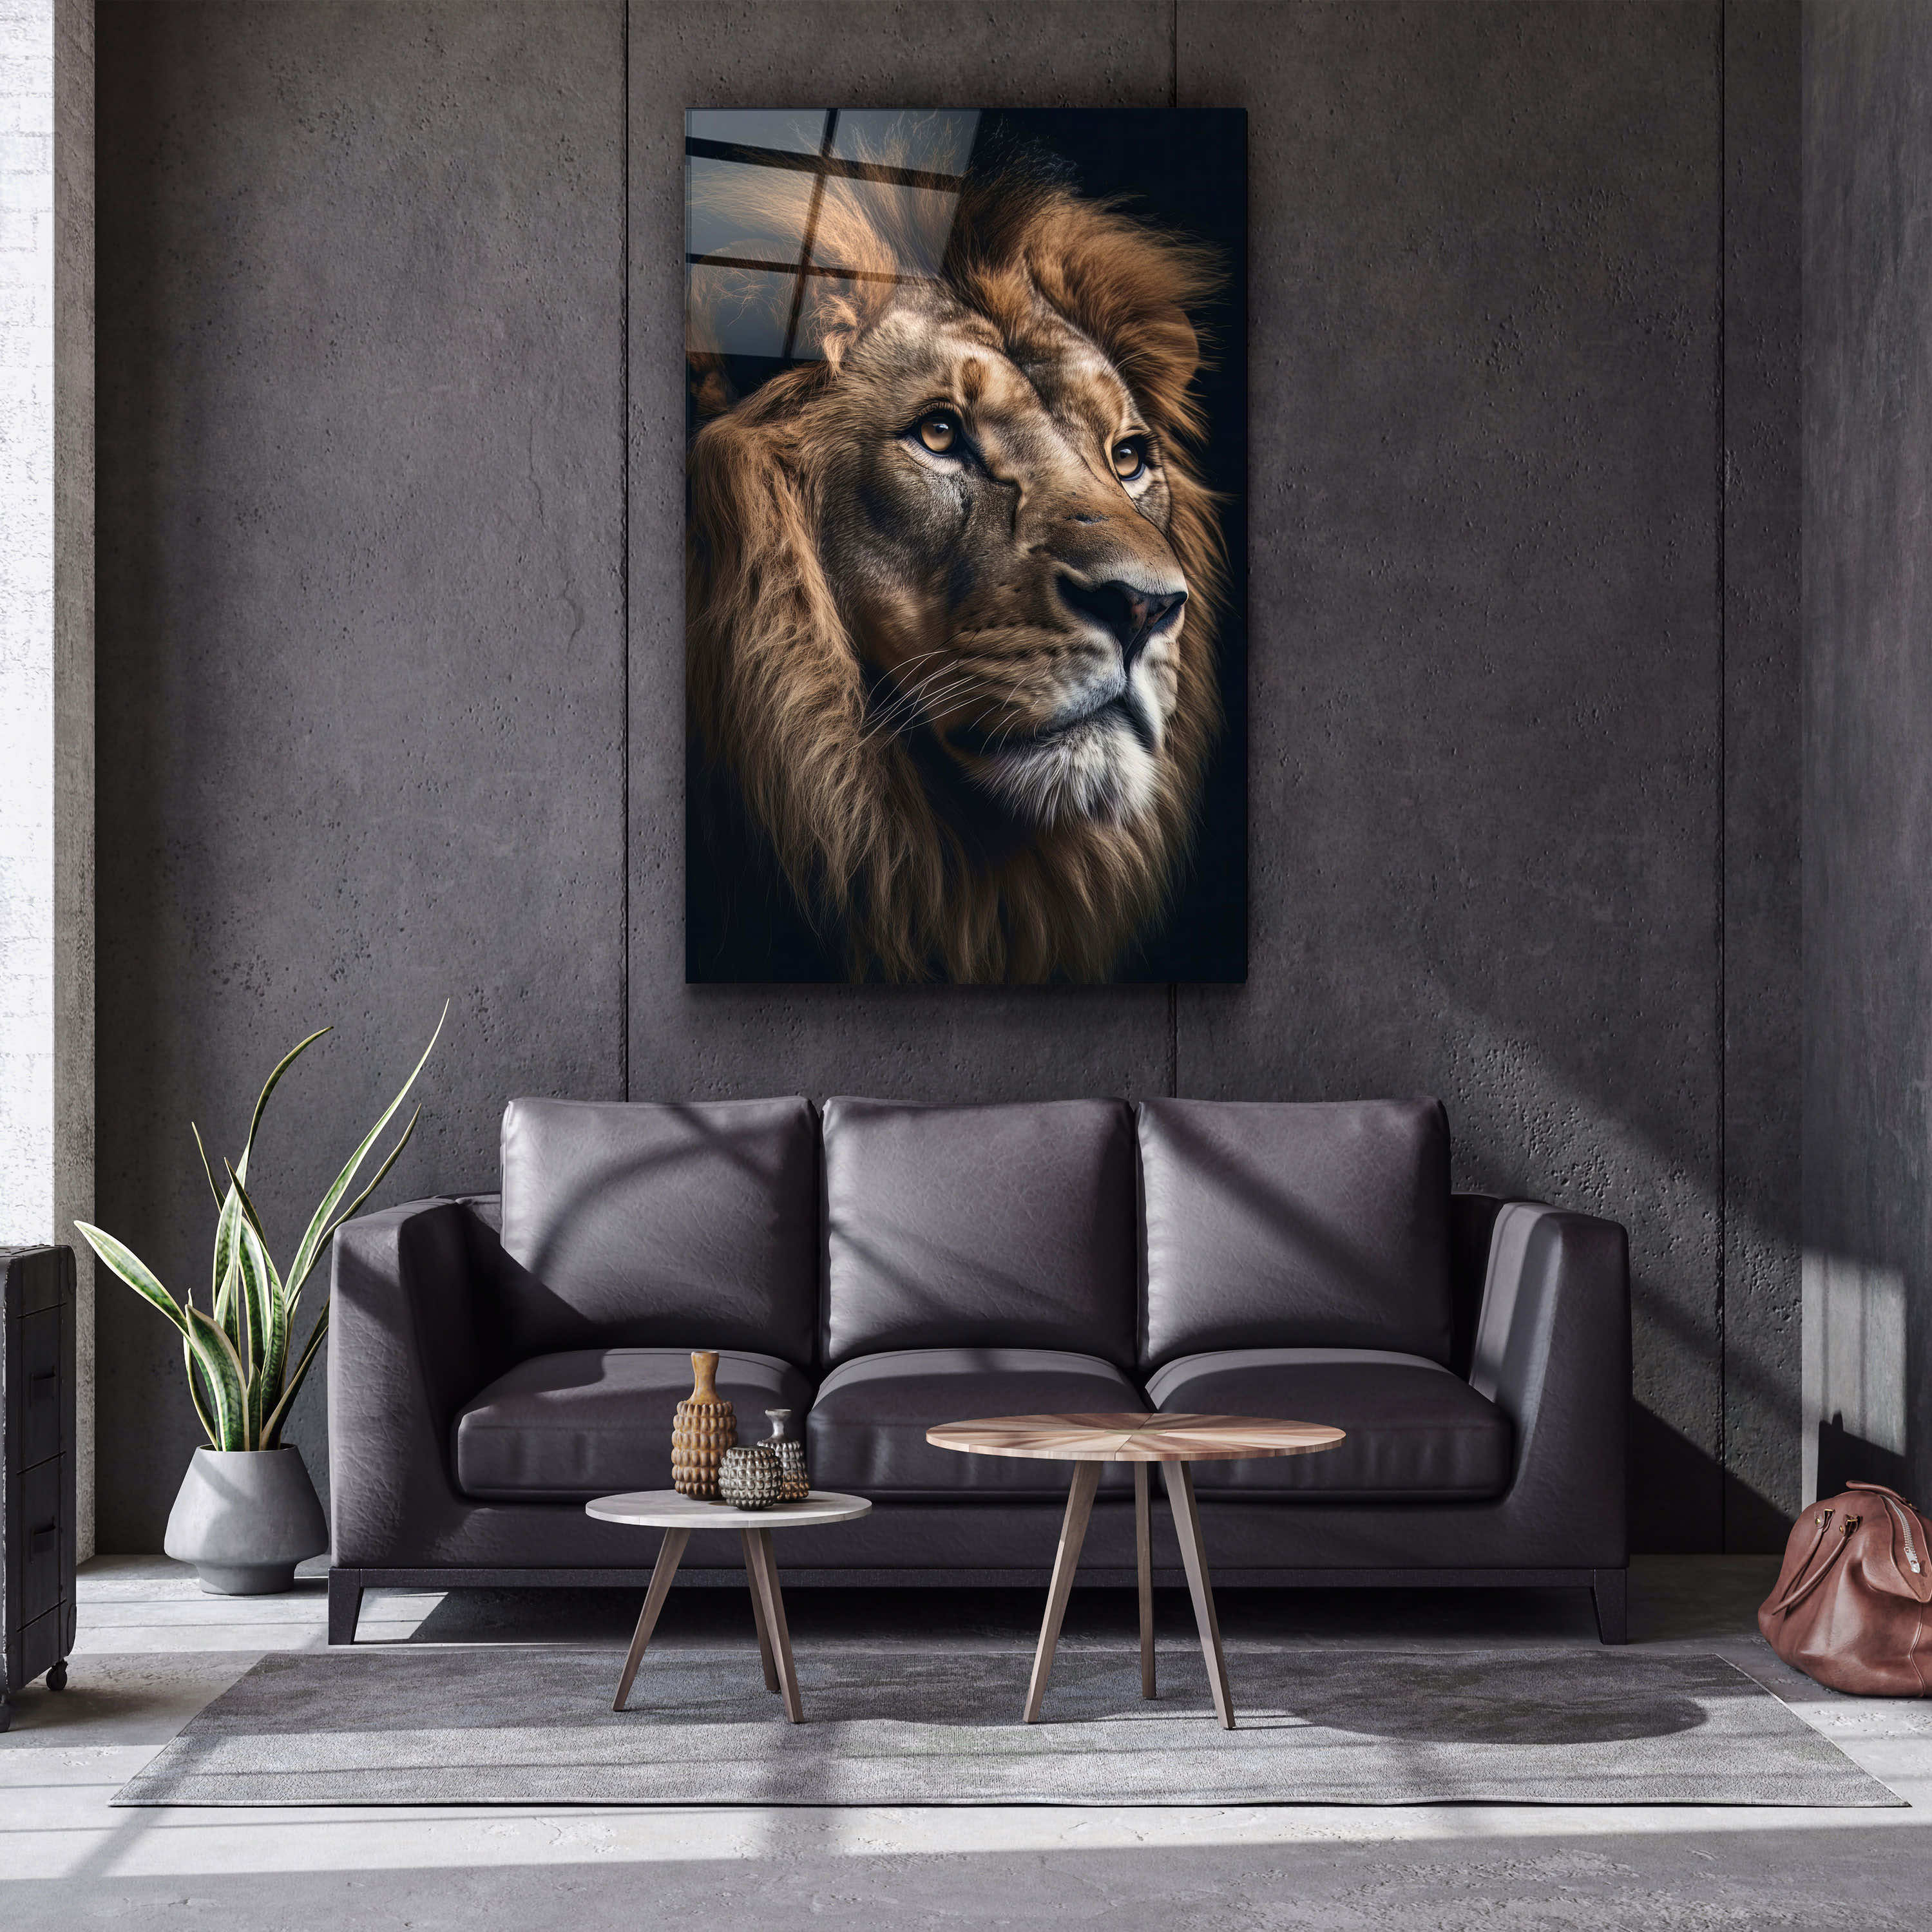 ・"The King"・Designers Collection Glass Wall Art